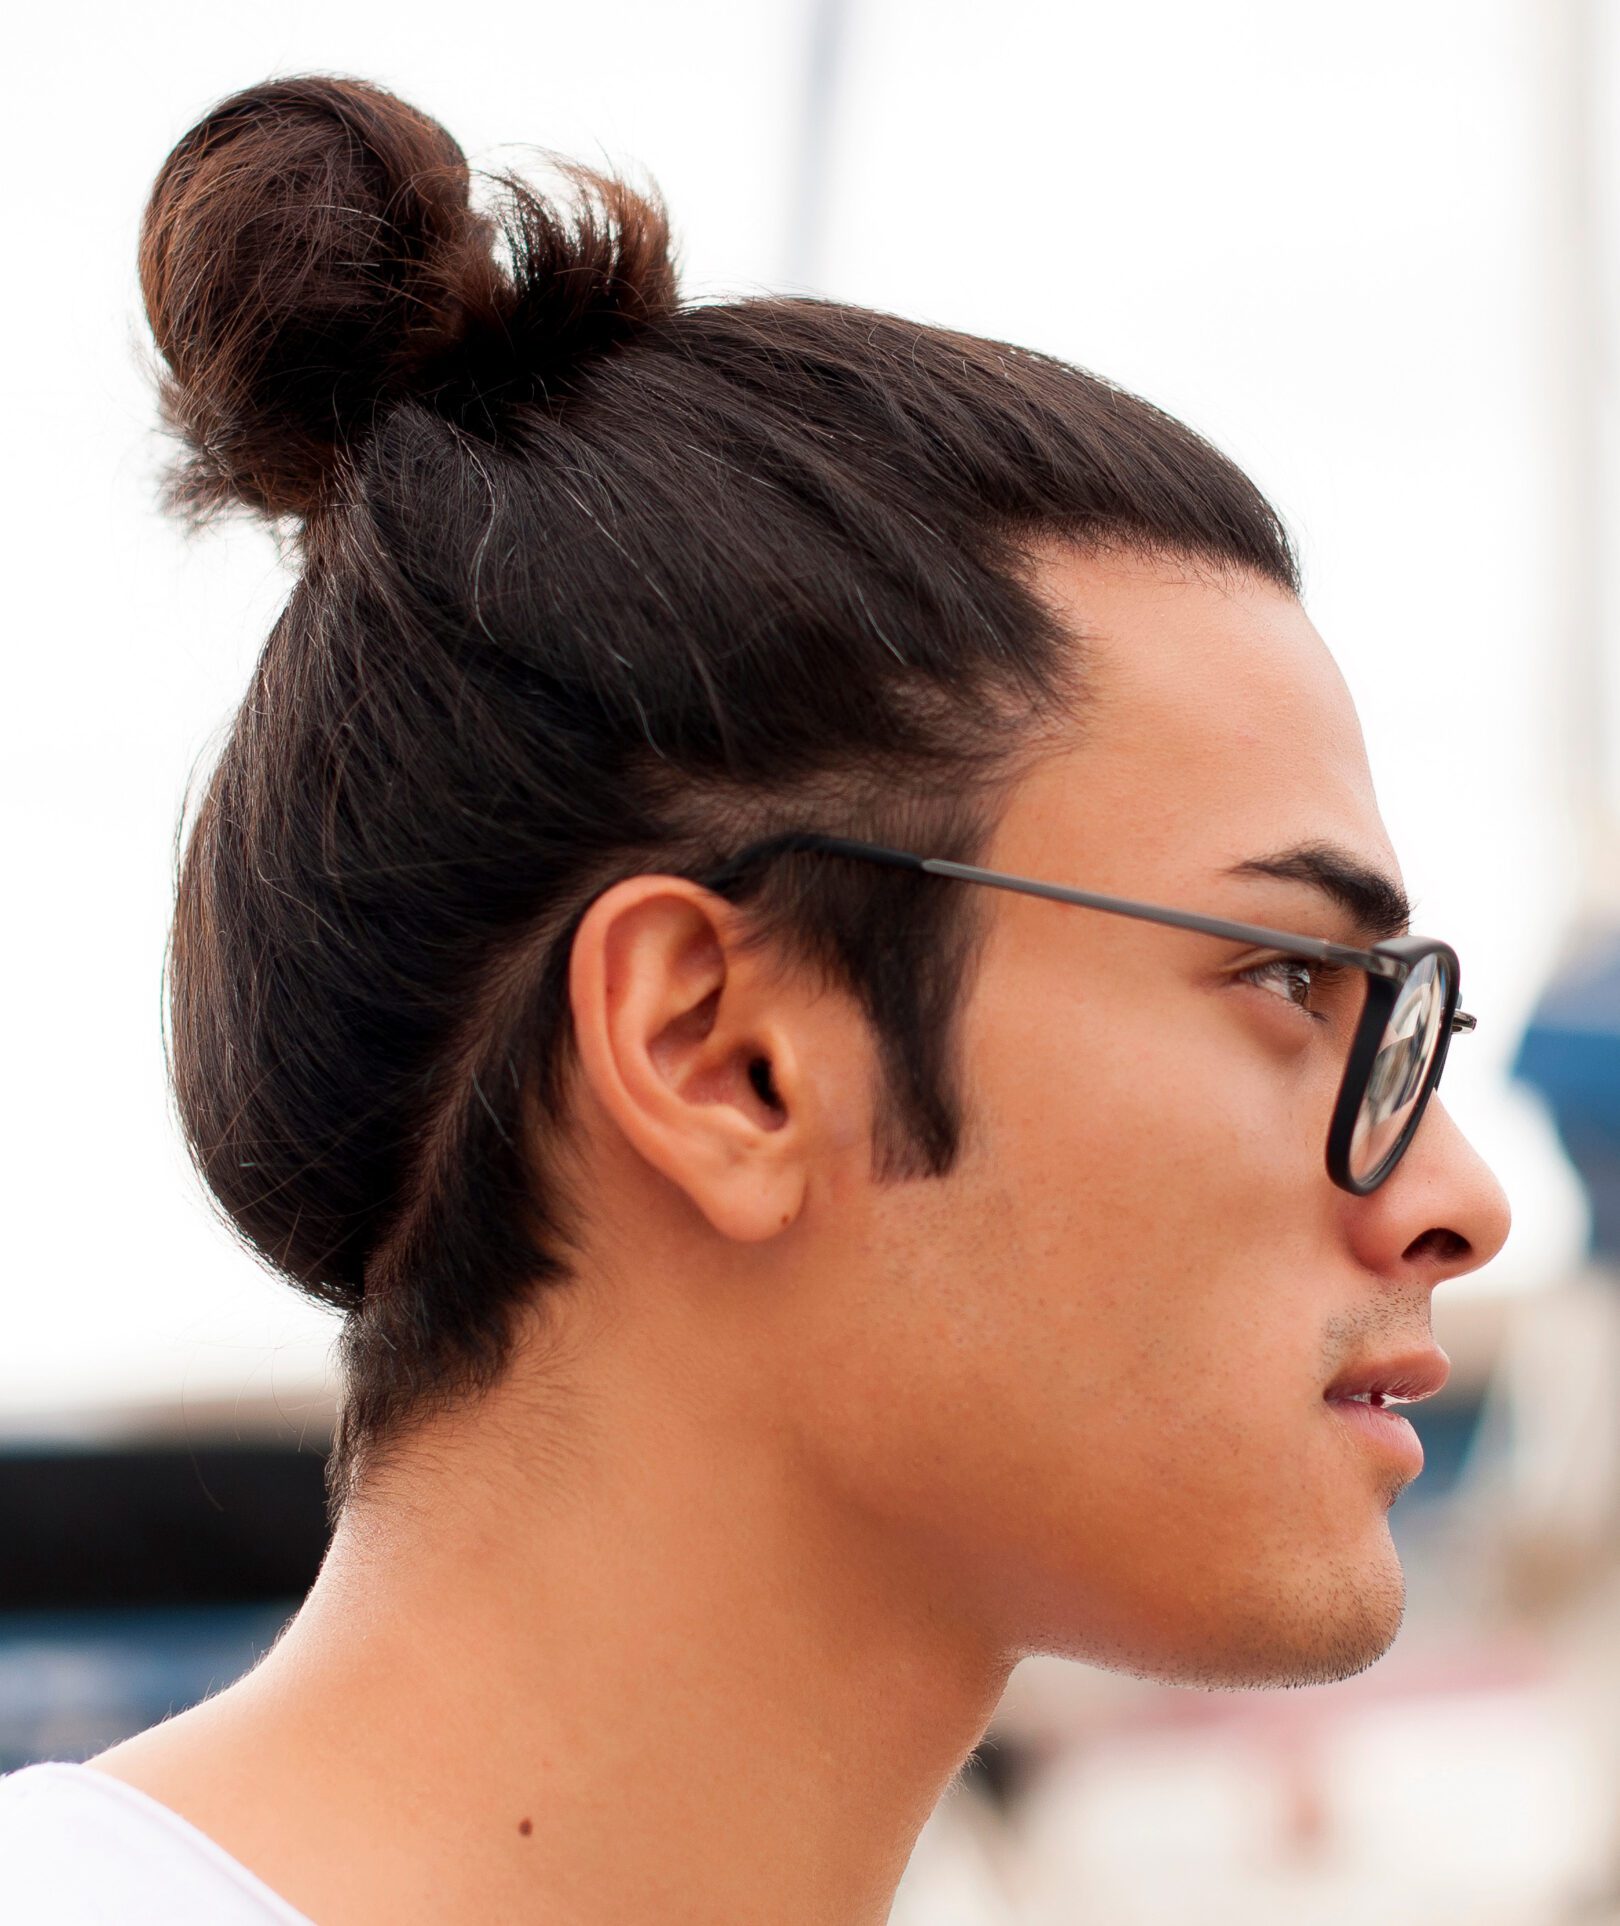 Young-Man-Top-Knot-Glasses-1620x1926.jpeg